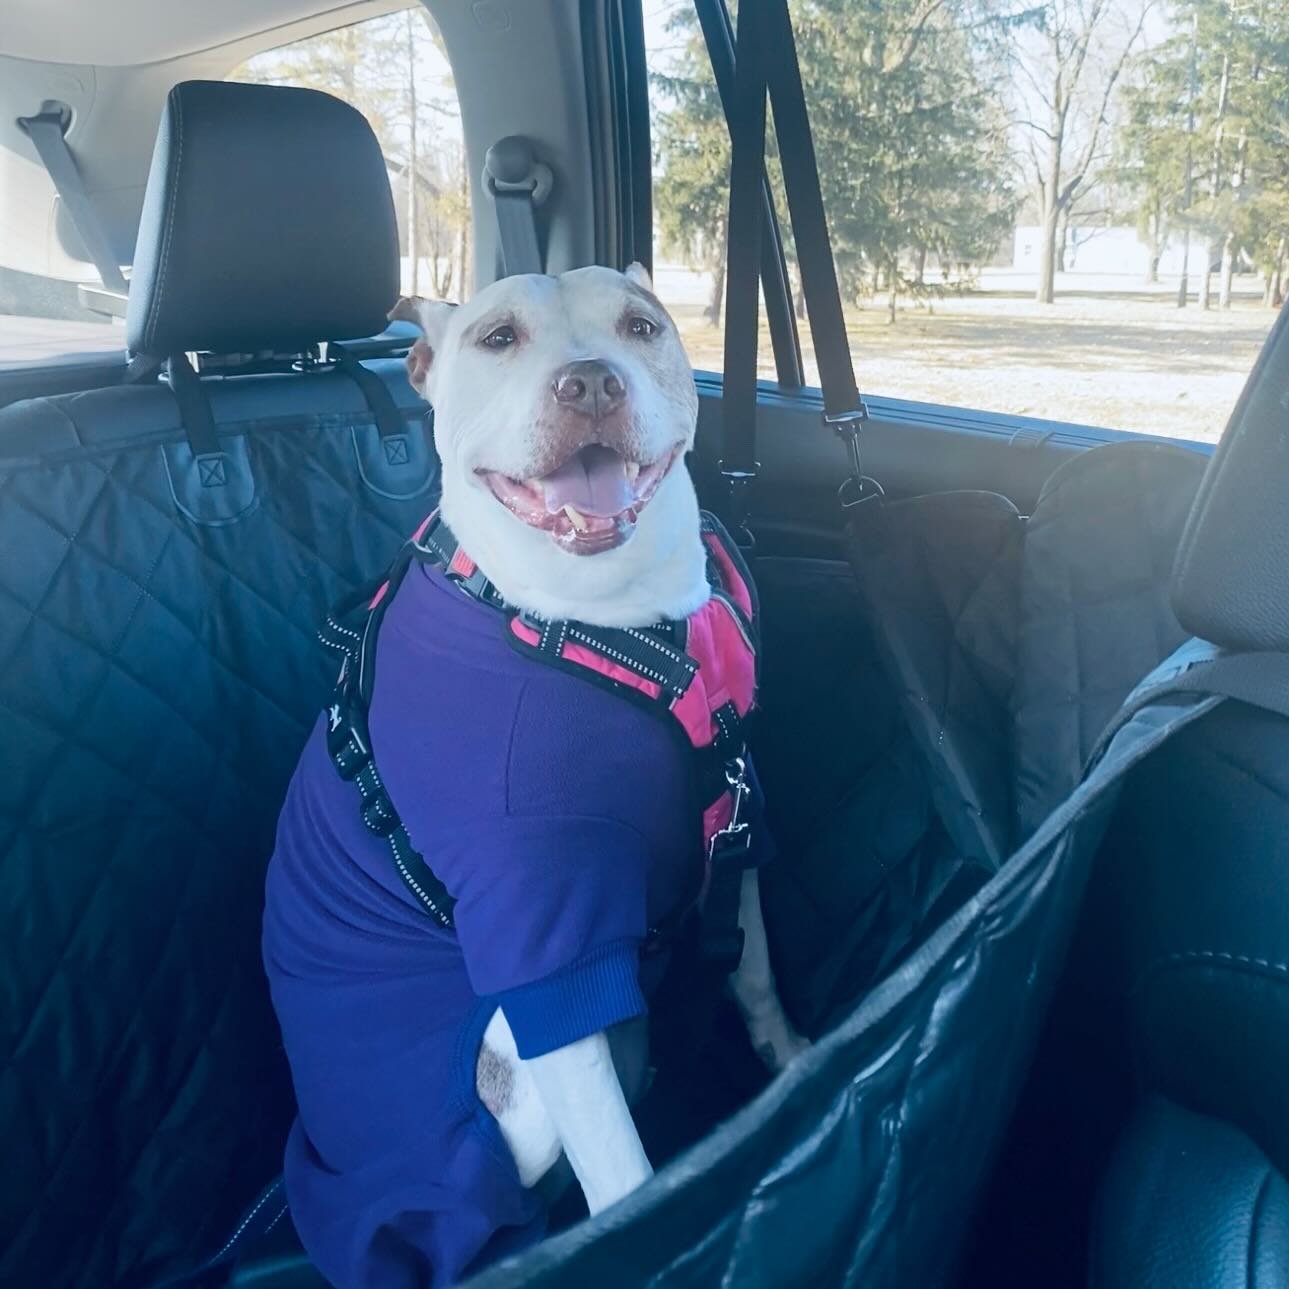 Are you looking for the most adorable copilot to share all of your adventures with? Miss Roxy is your girl! 😍

This sweet senior gal is ready to find her new best friend! Click the &rdquo;adoptables&rdquo; link in our bio to fill out an adoption app